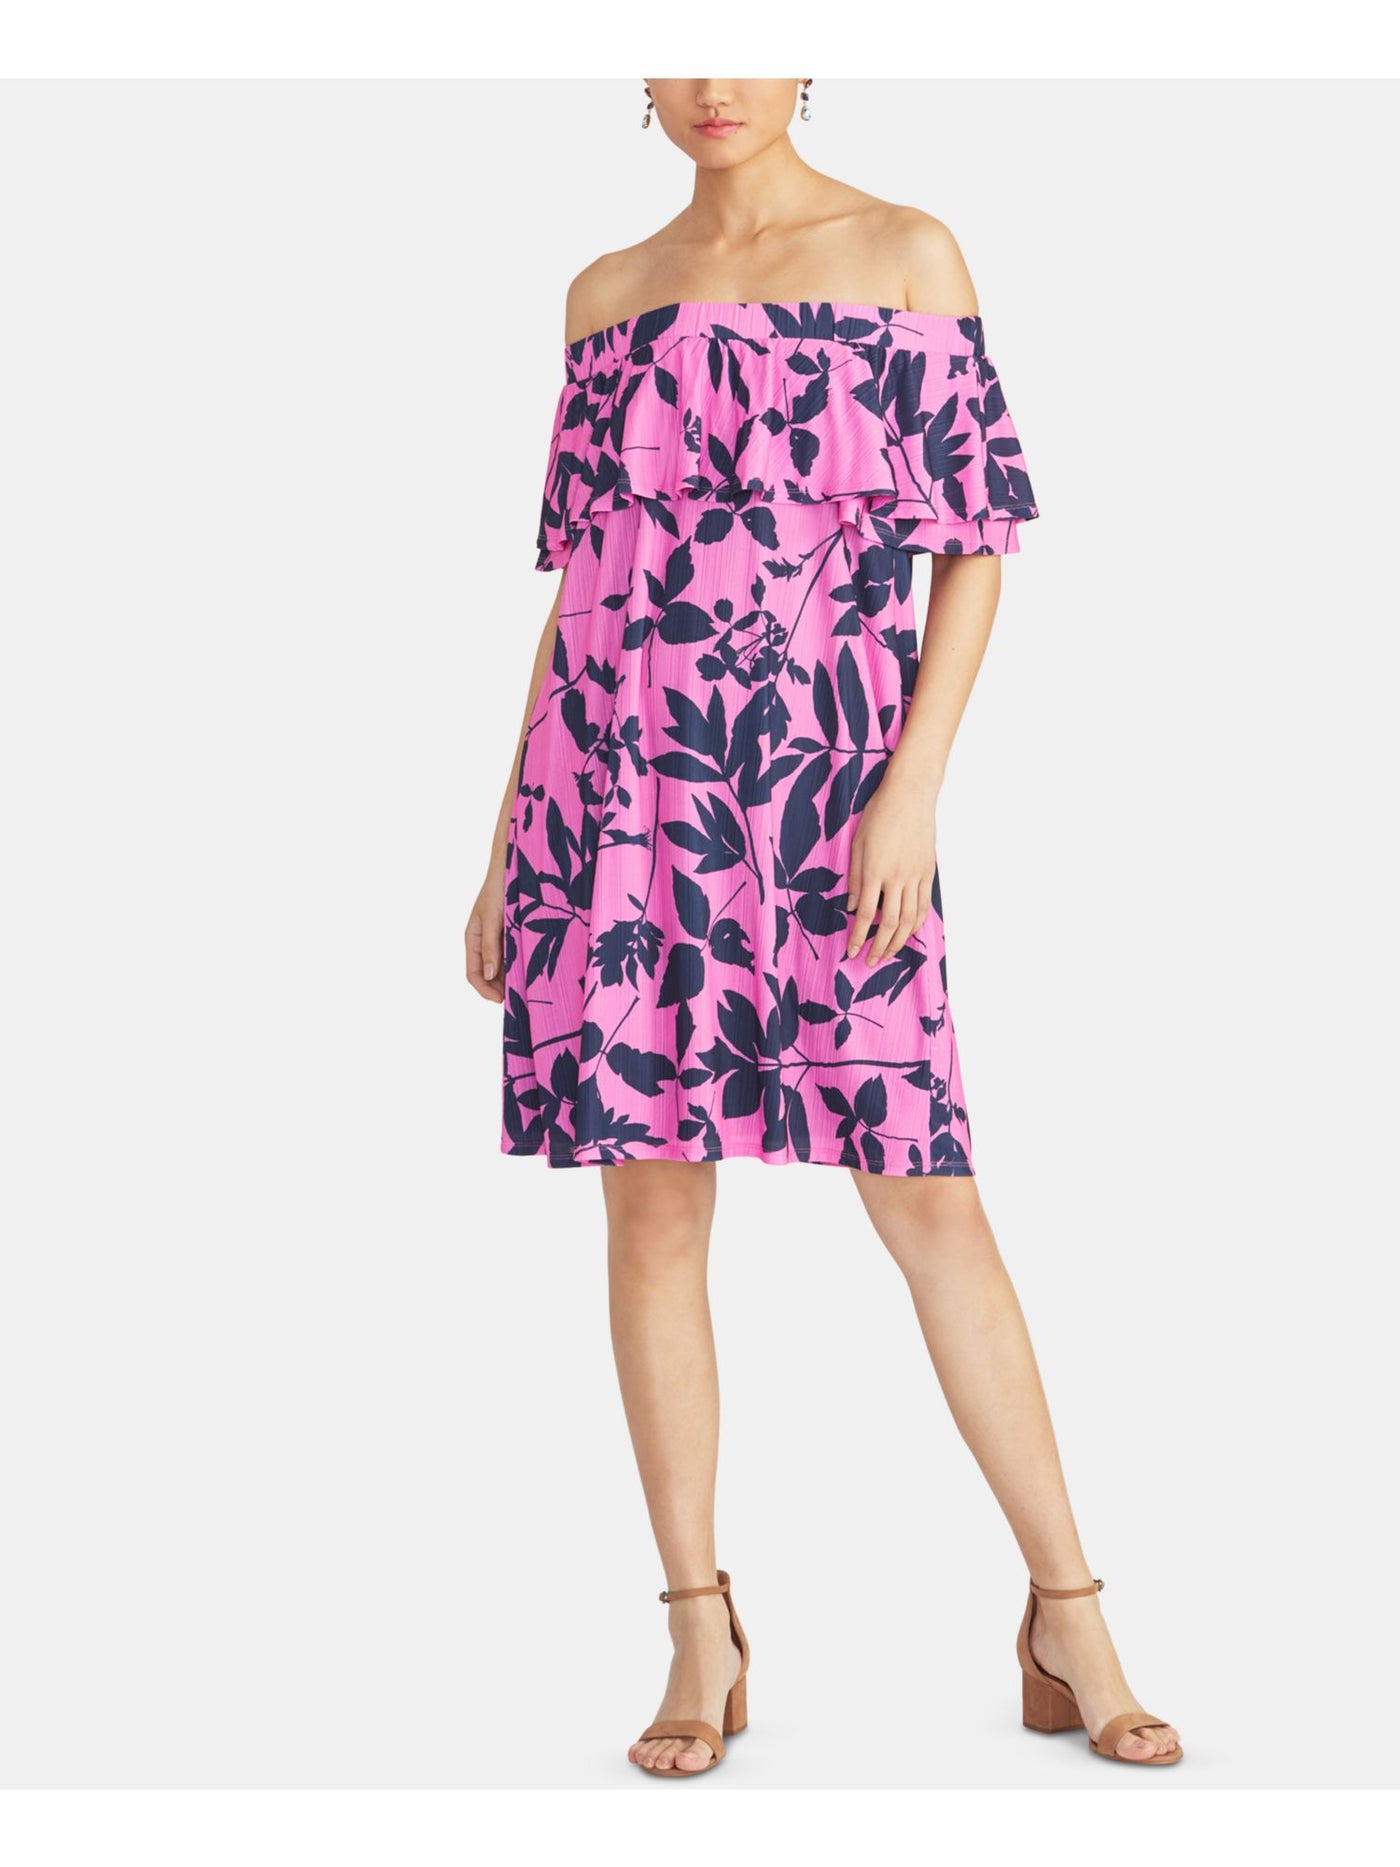 RACHEL ROY Womens Pink Floral Short Sleeve Off Shoulder Above The Knee Party Shift Dress XS